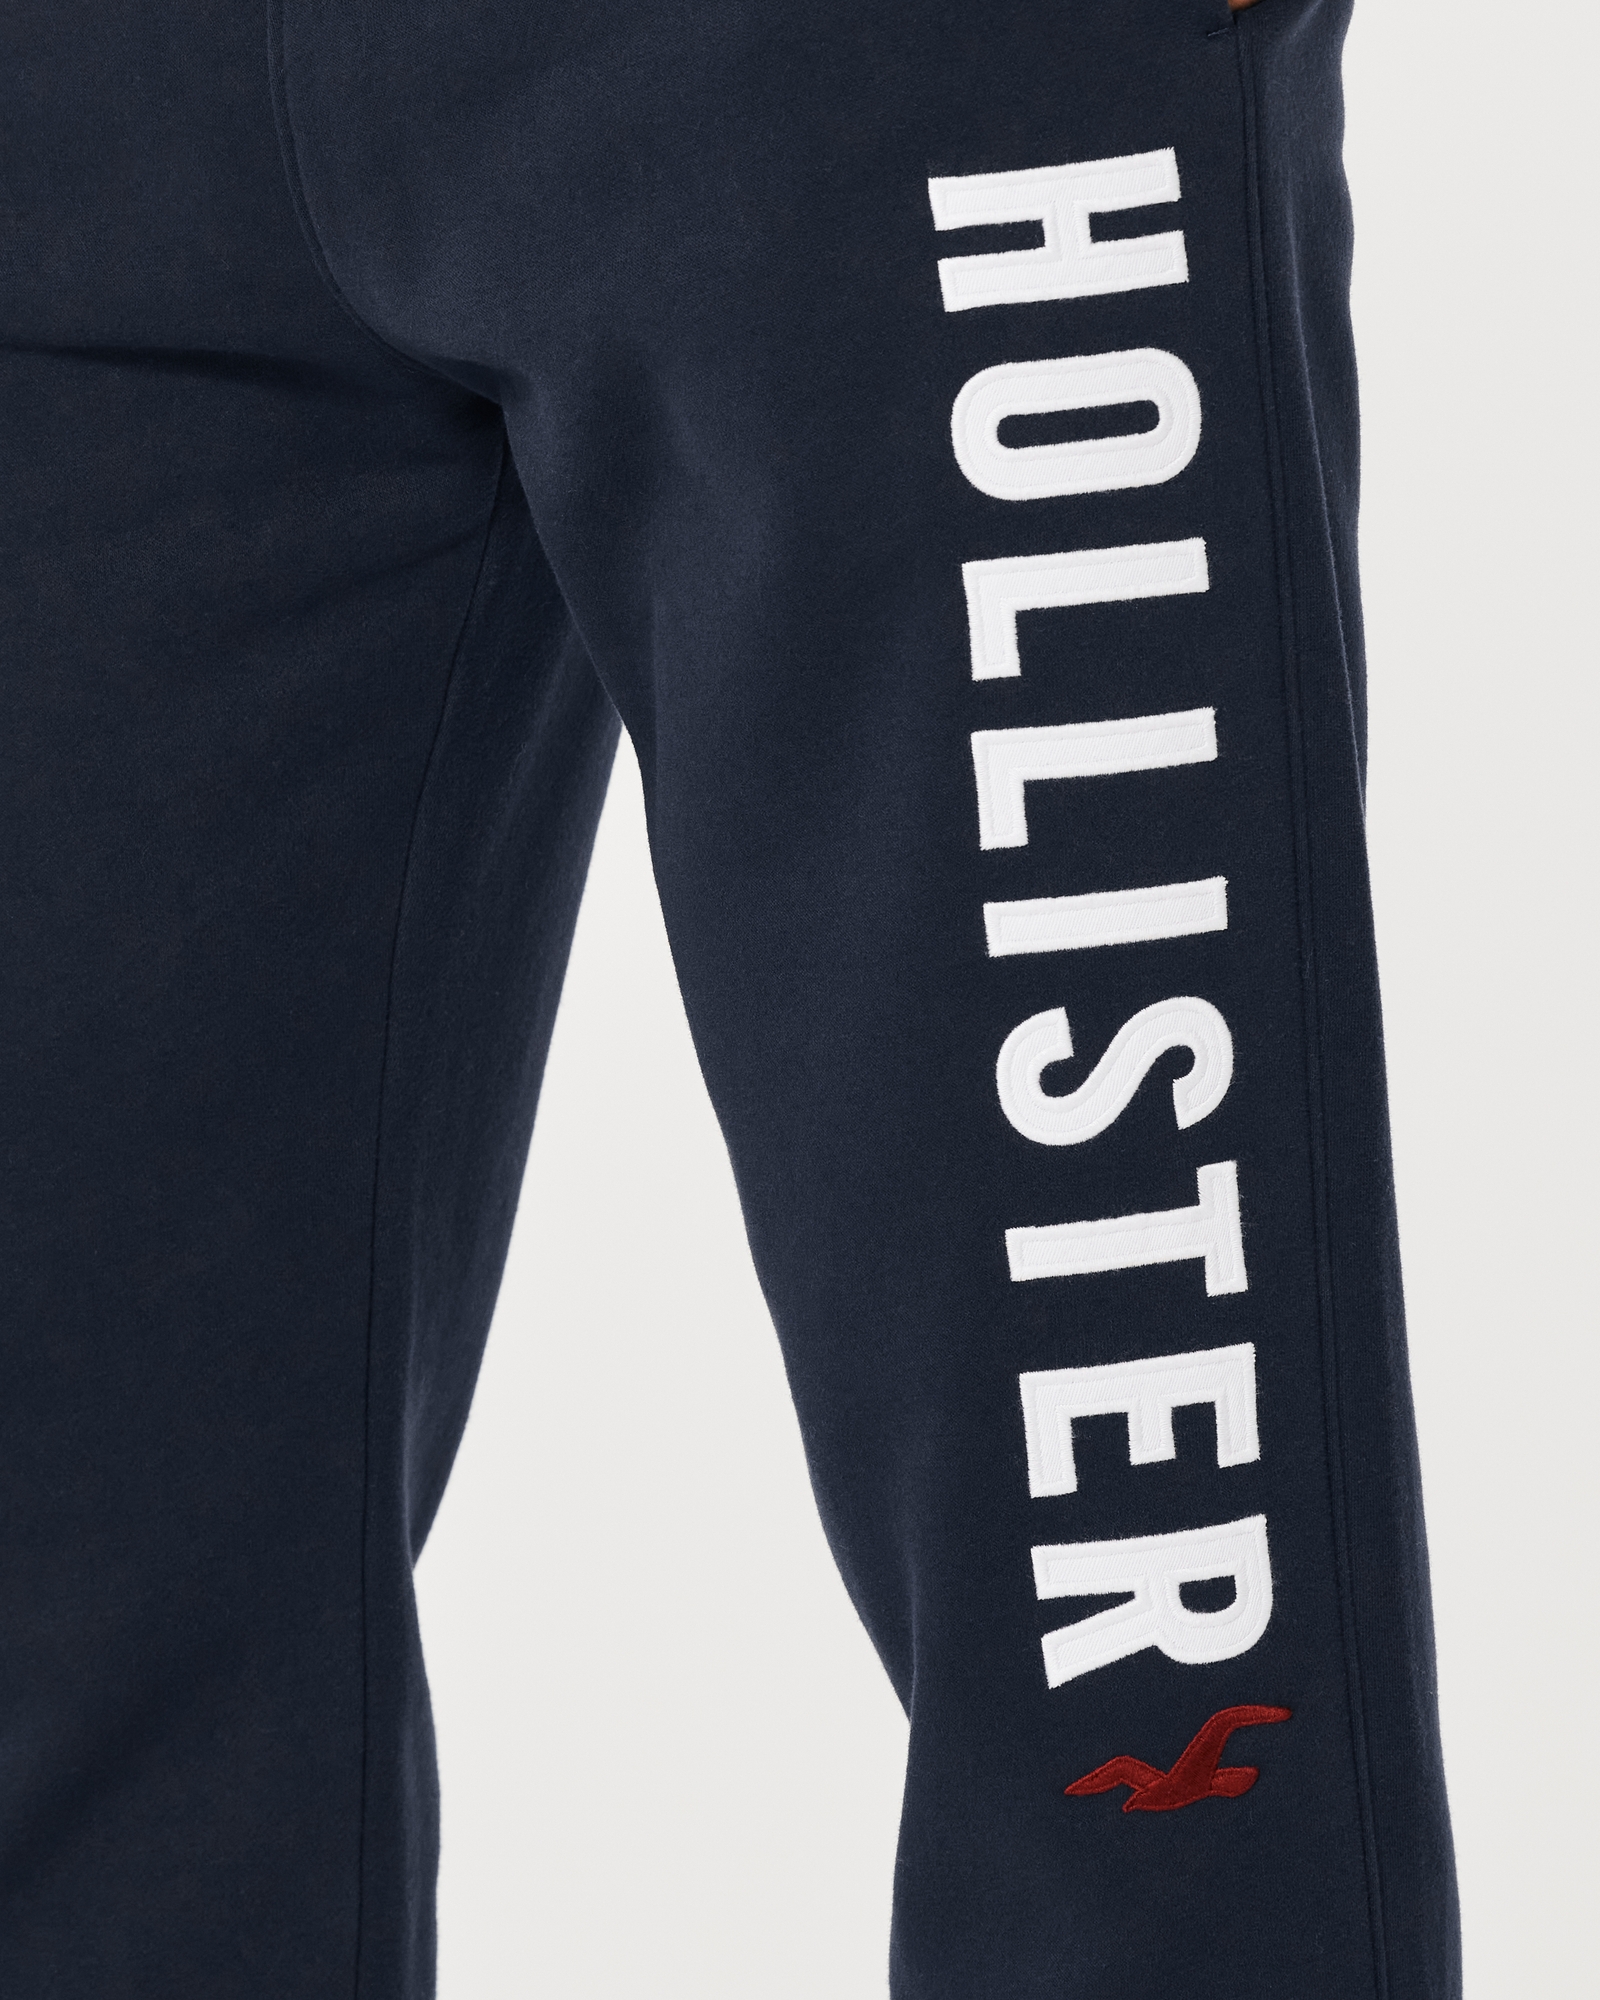 https://img.hollisterco.com/is/image/anf/KIC_334-3059-0893-200_model5.jpg?policy=product-extra-large